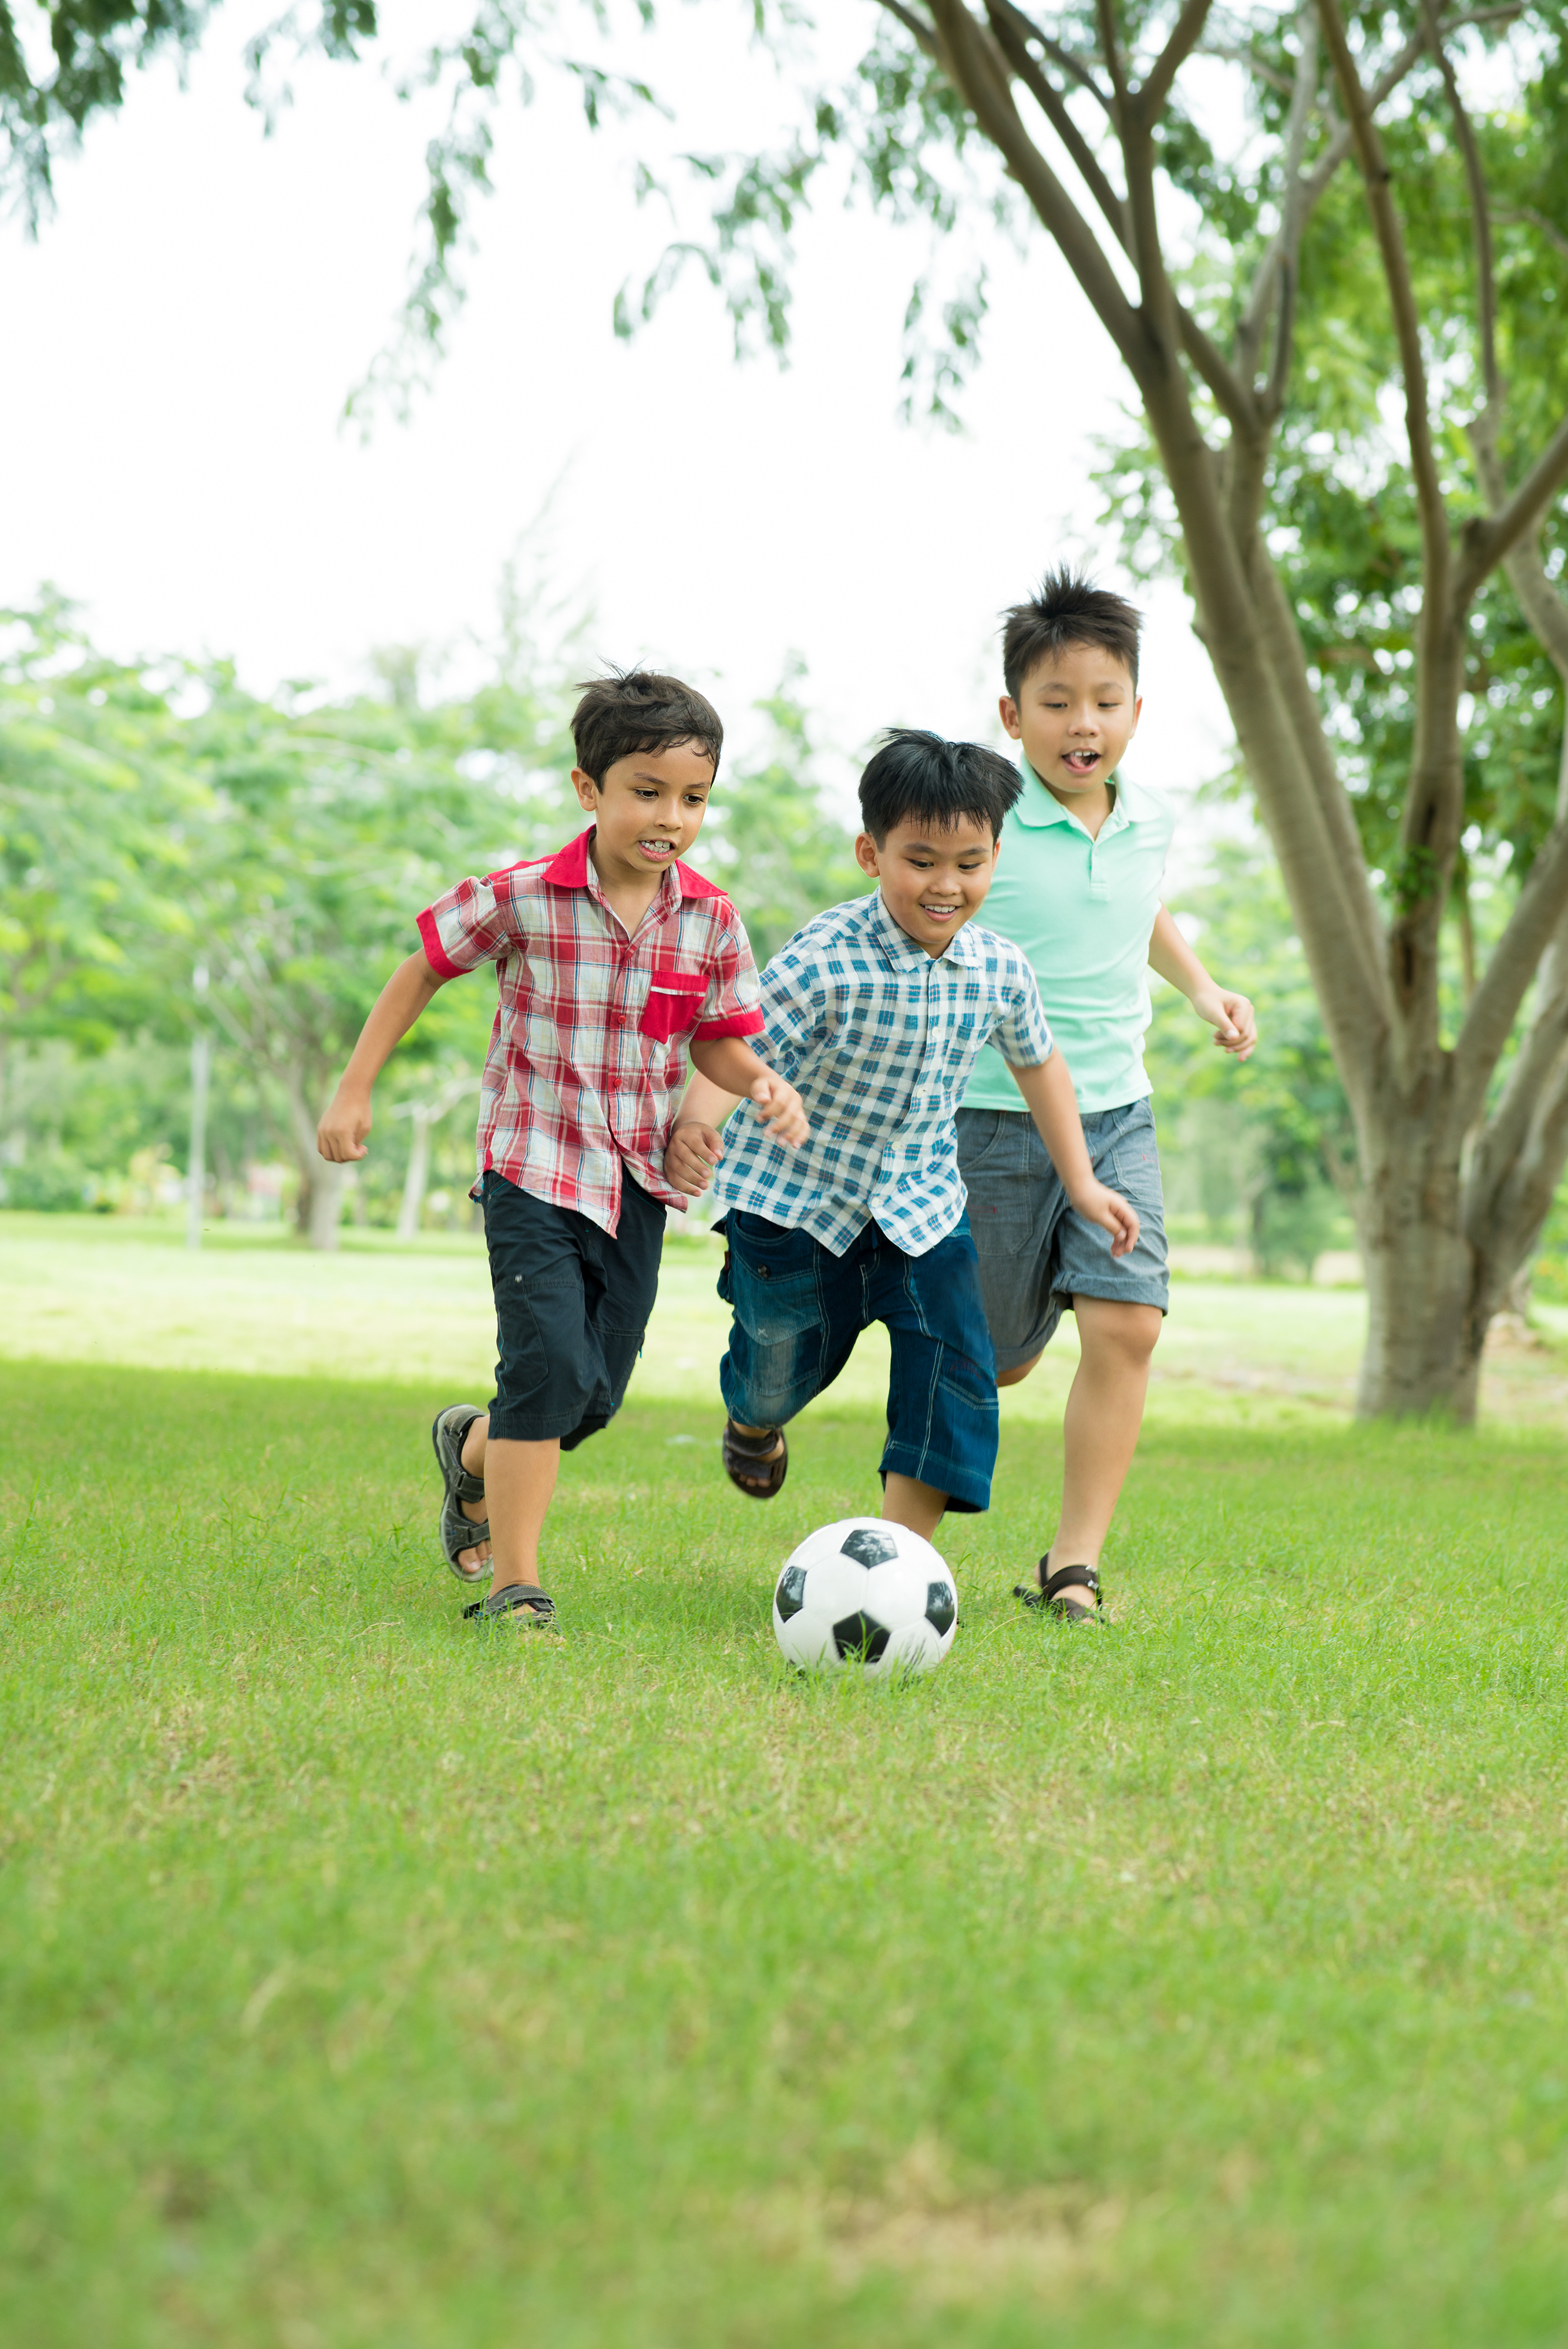 Older children may sustain injuries while playing sports